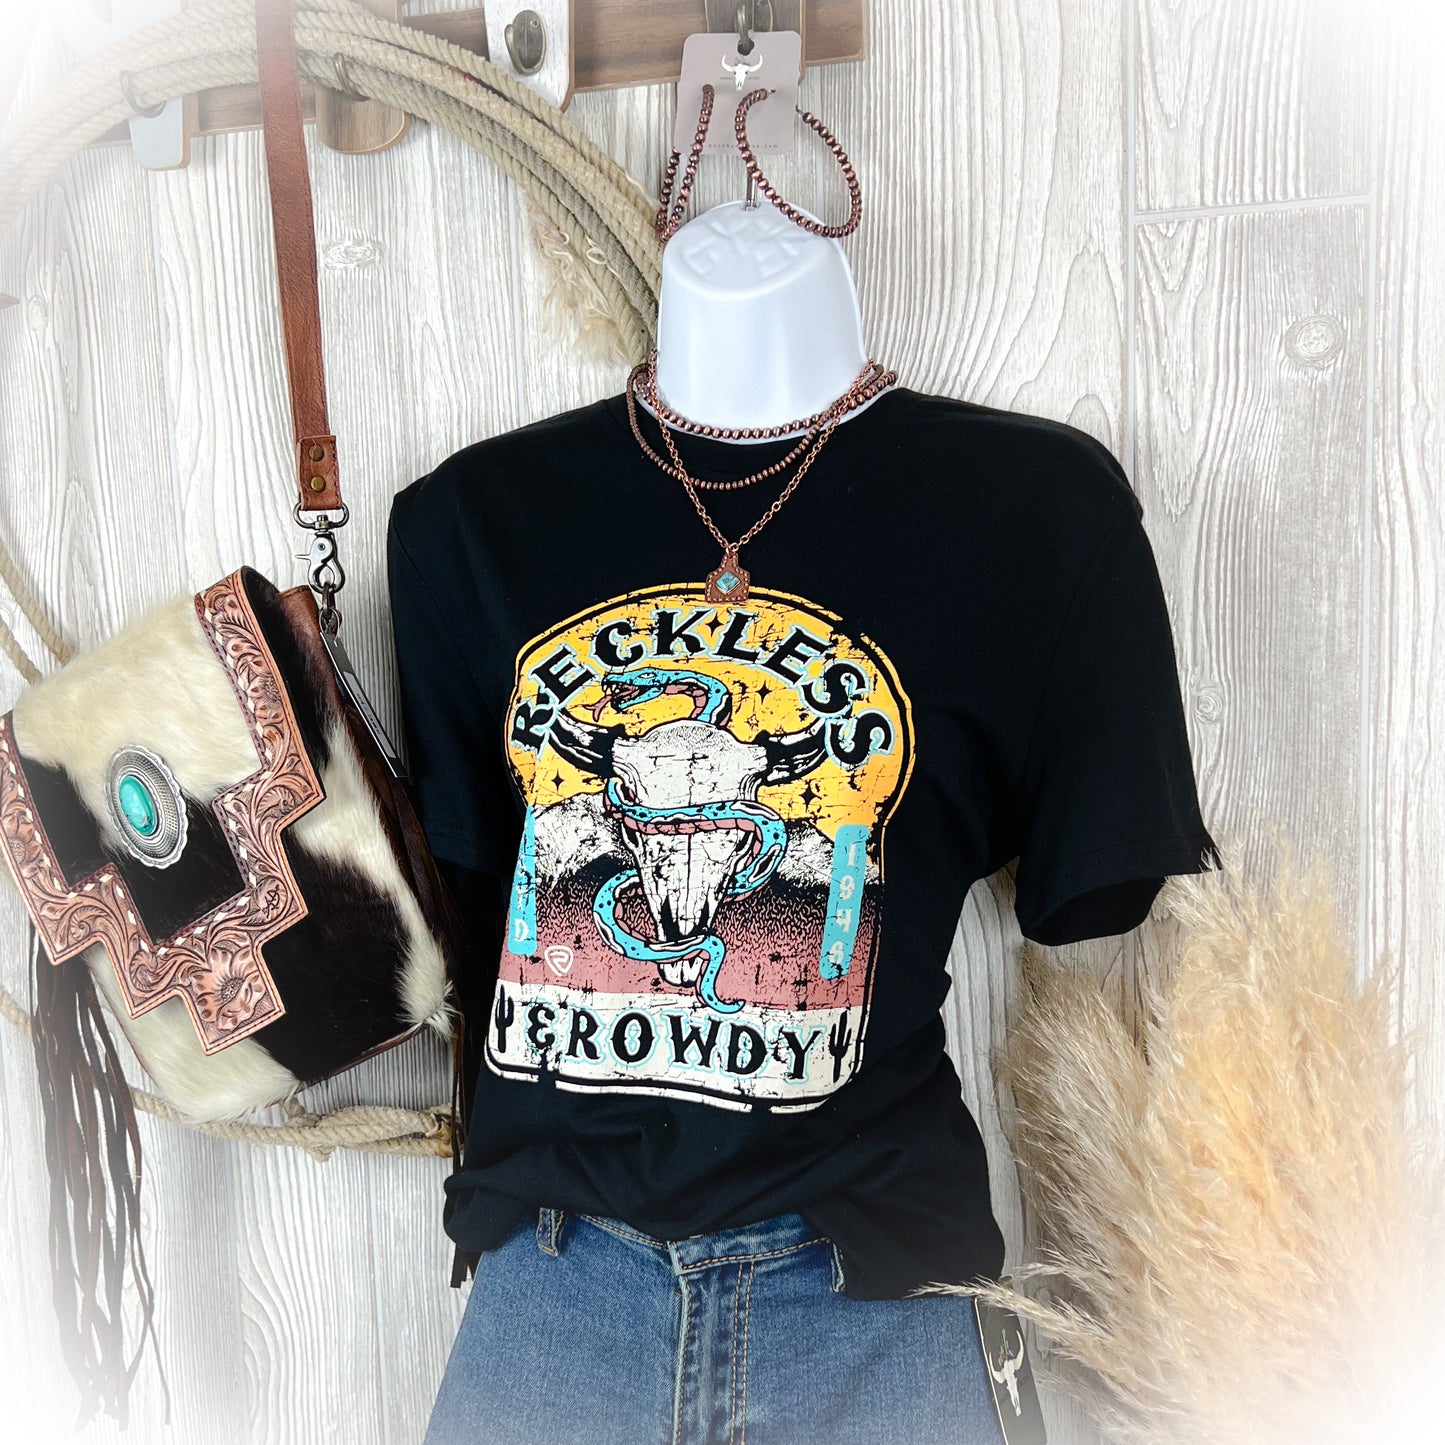 Reckless Cowboy - Graphic Tee